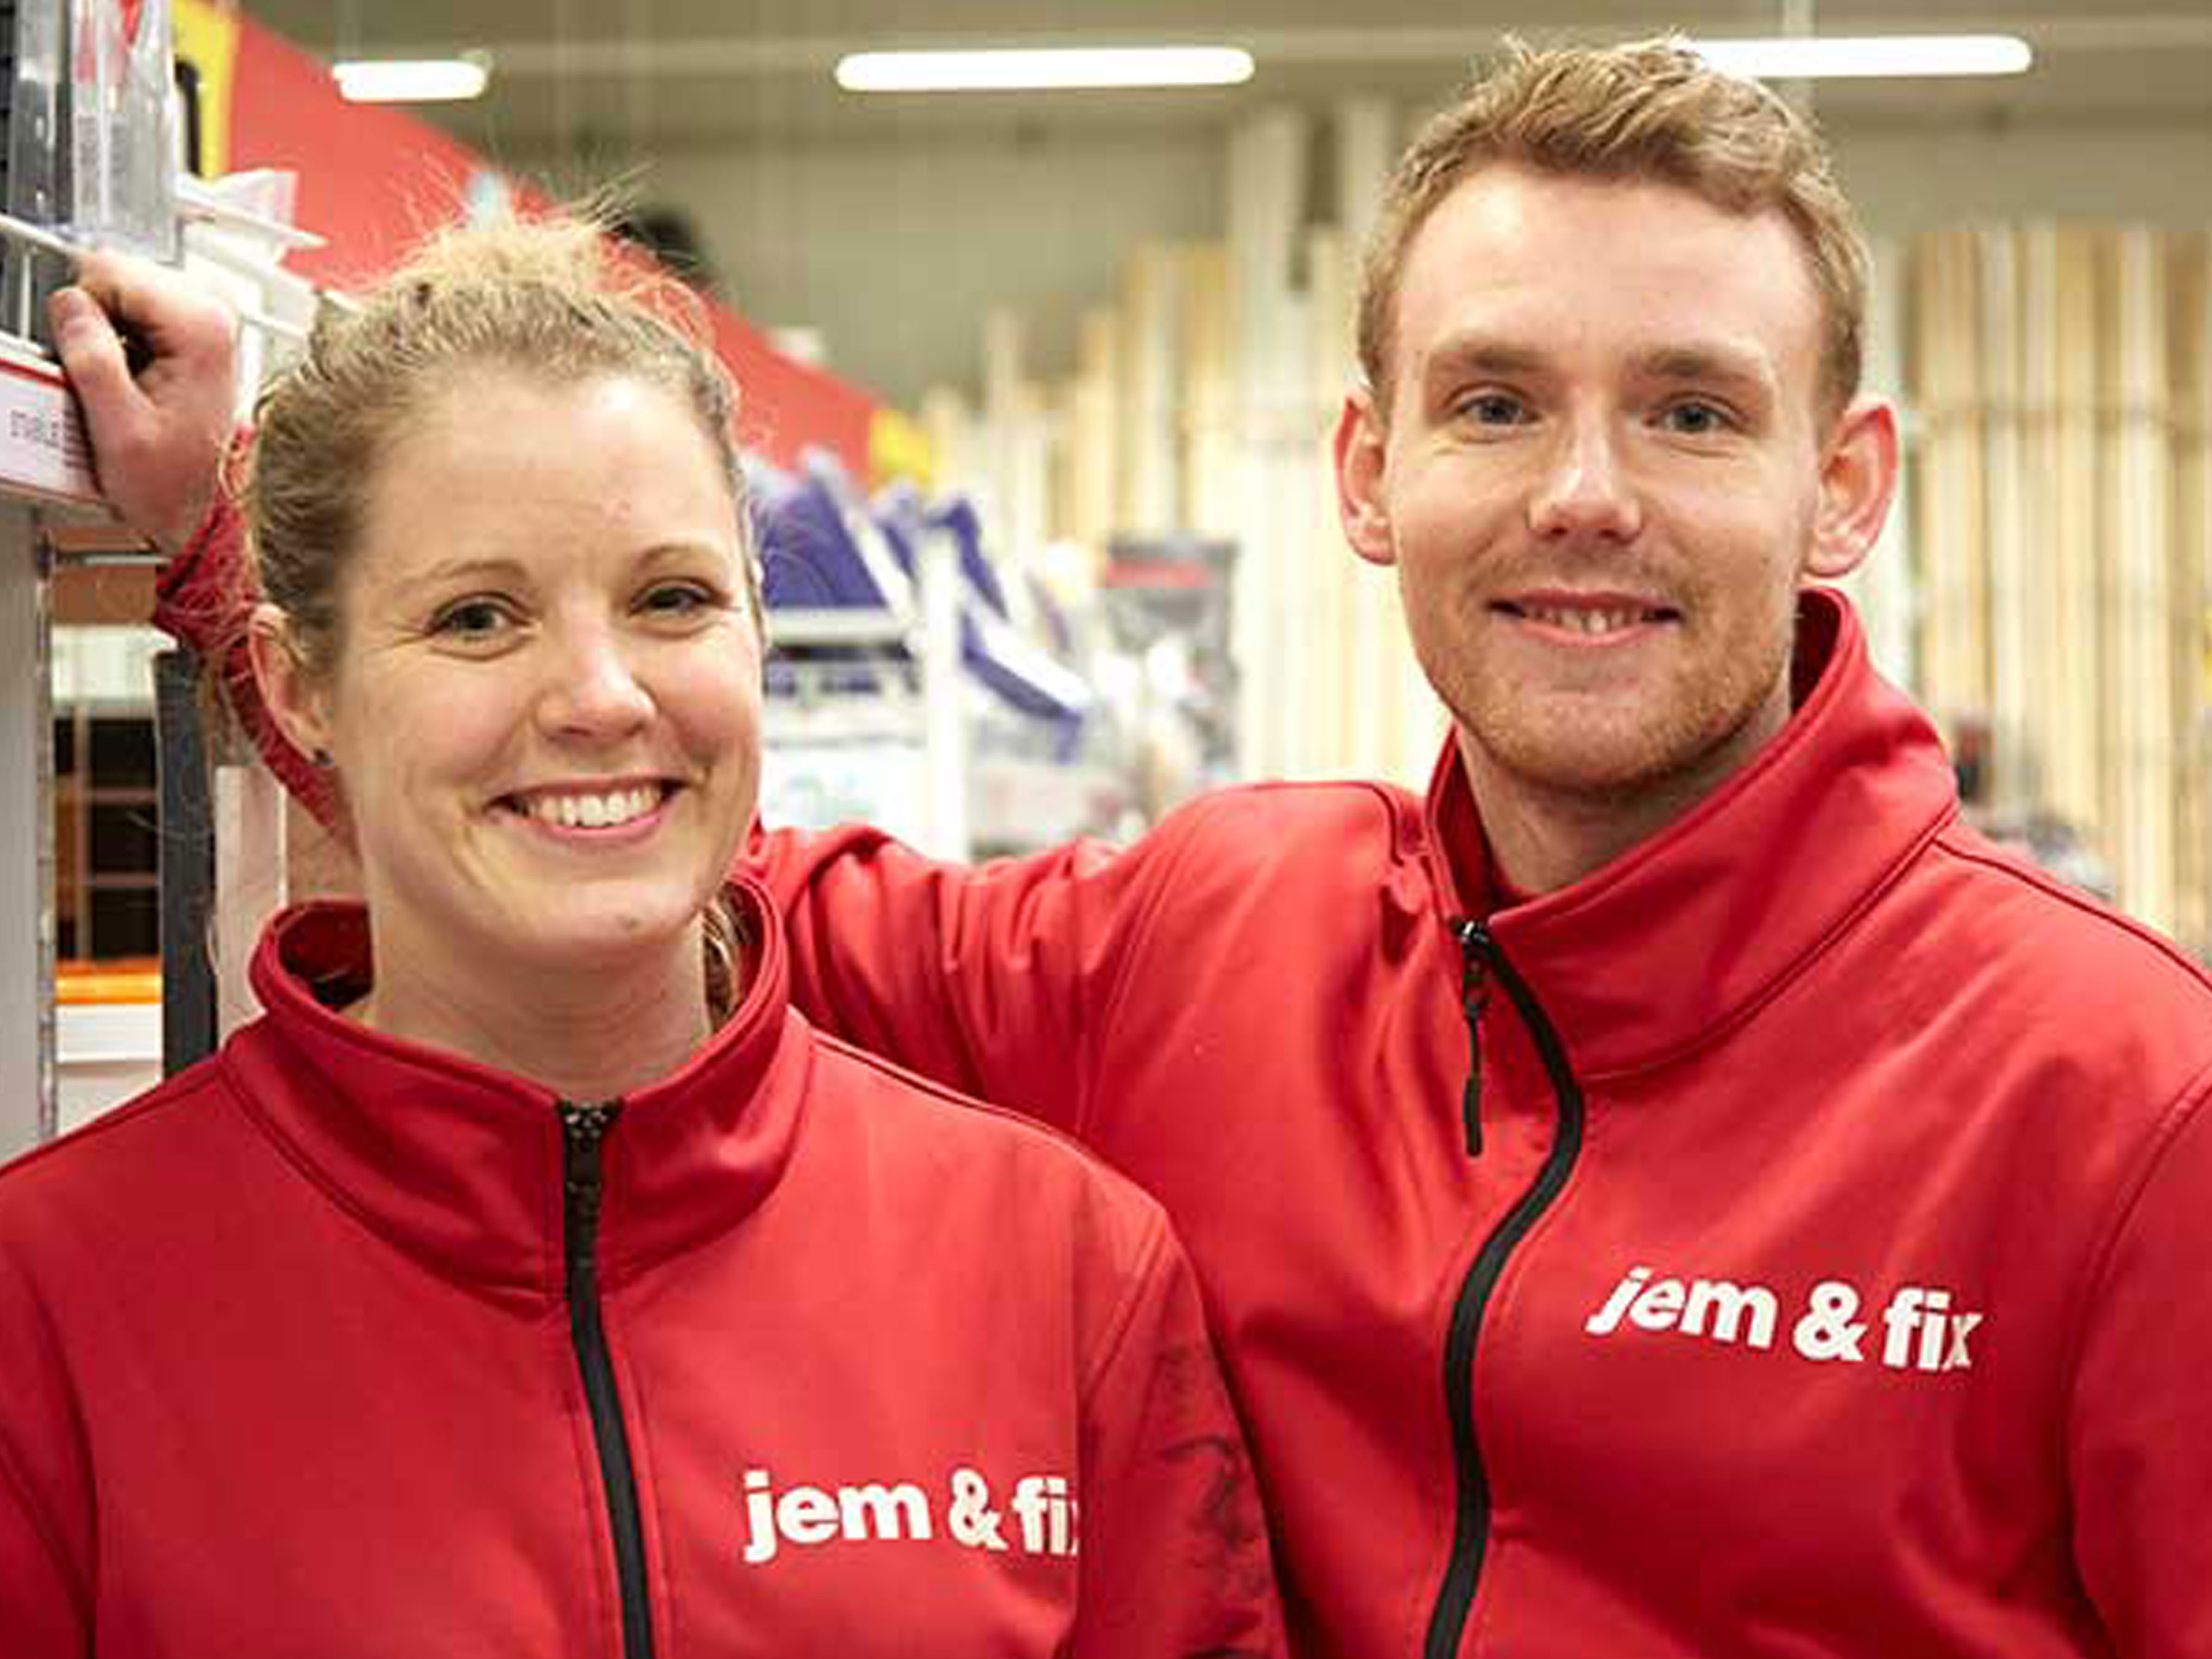 jem & fix employees in one of their stores